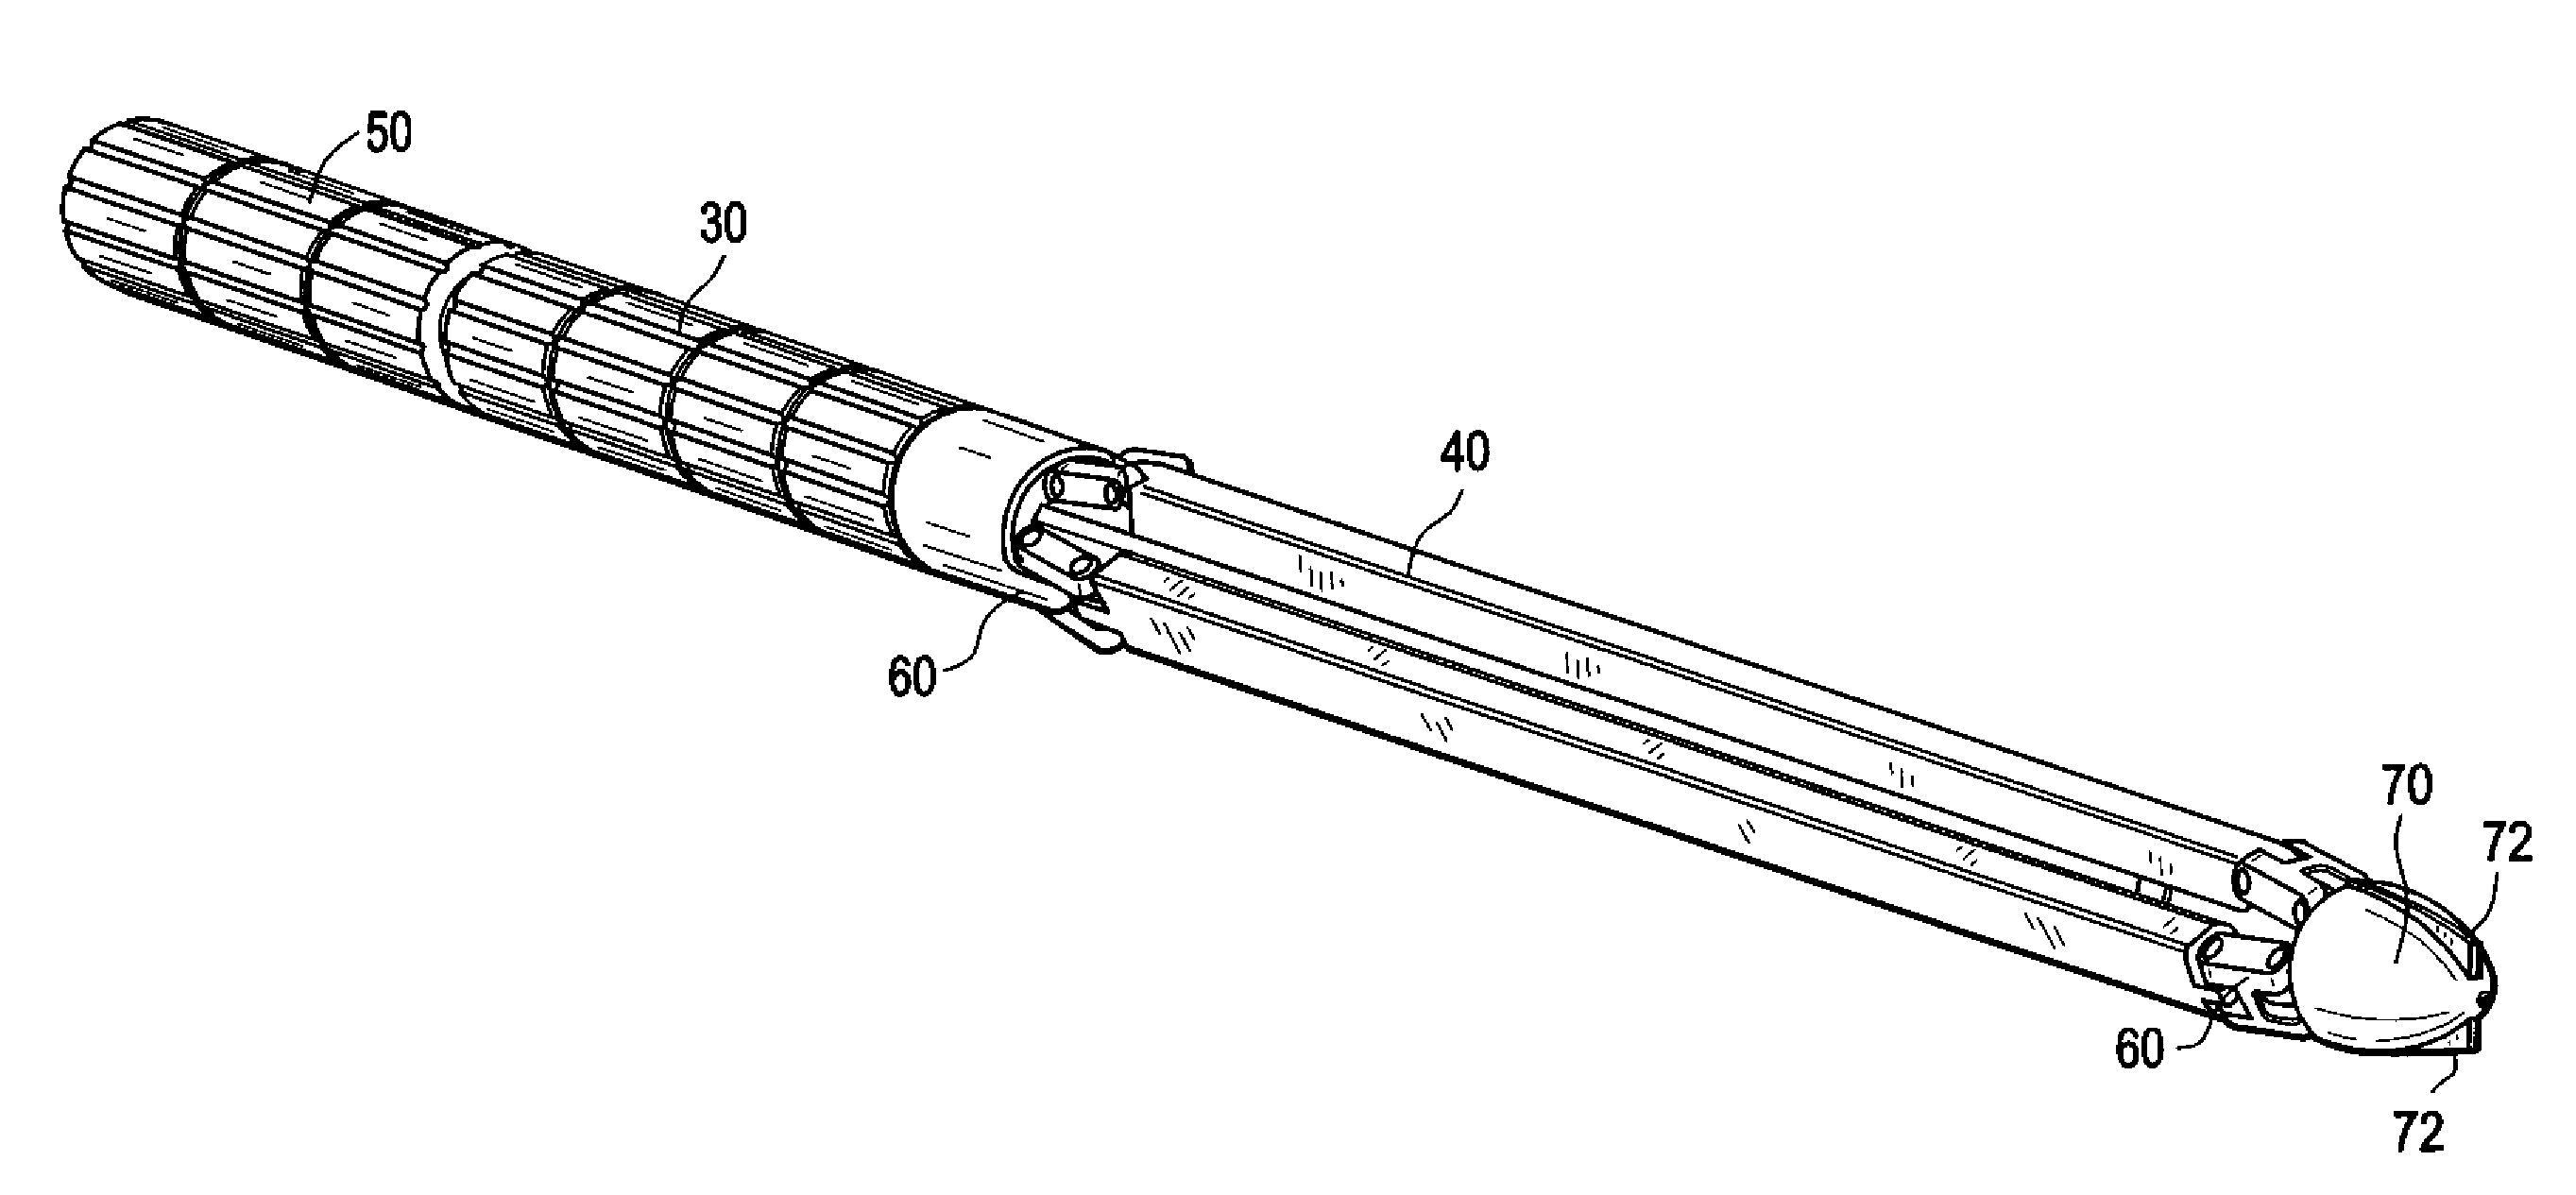 Minimally invasive tissue expander systems and methods